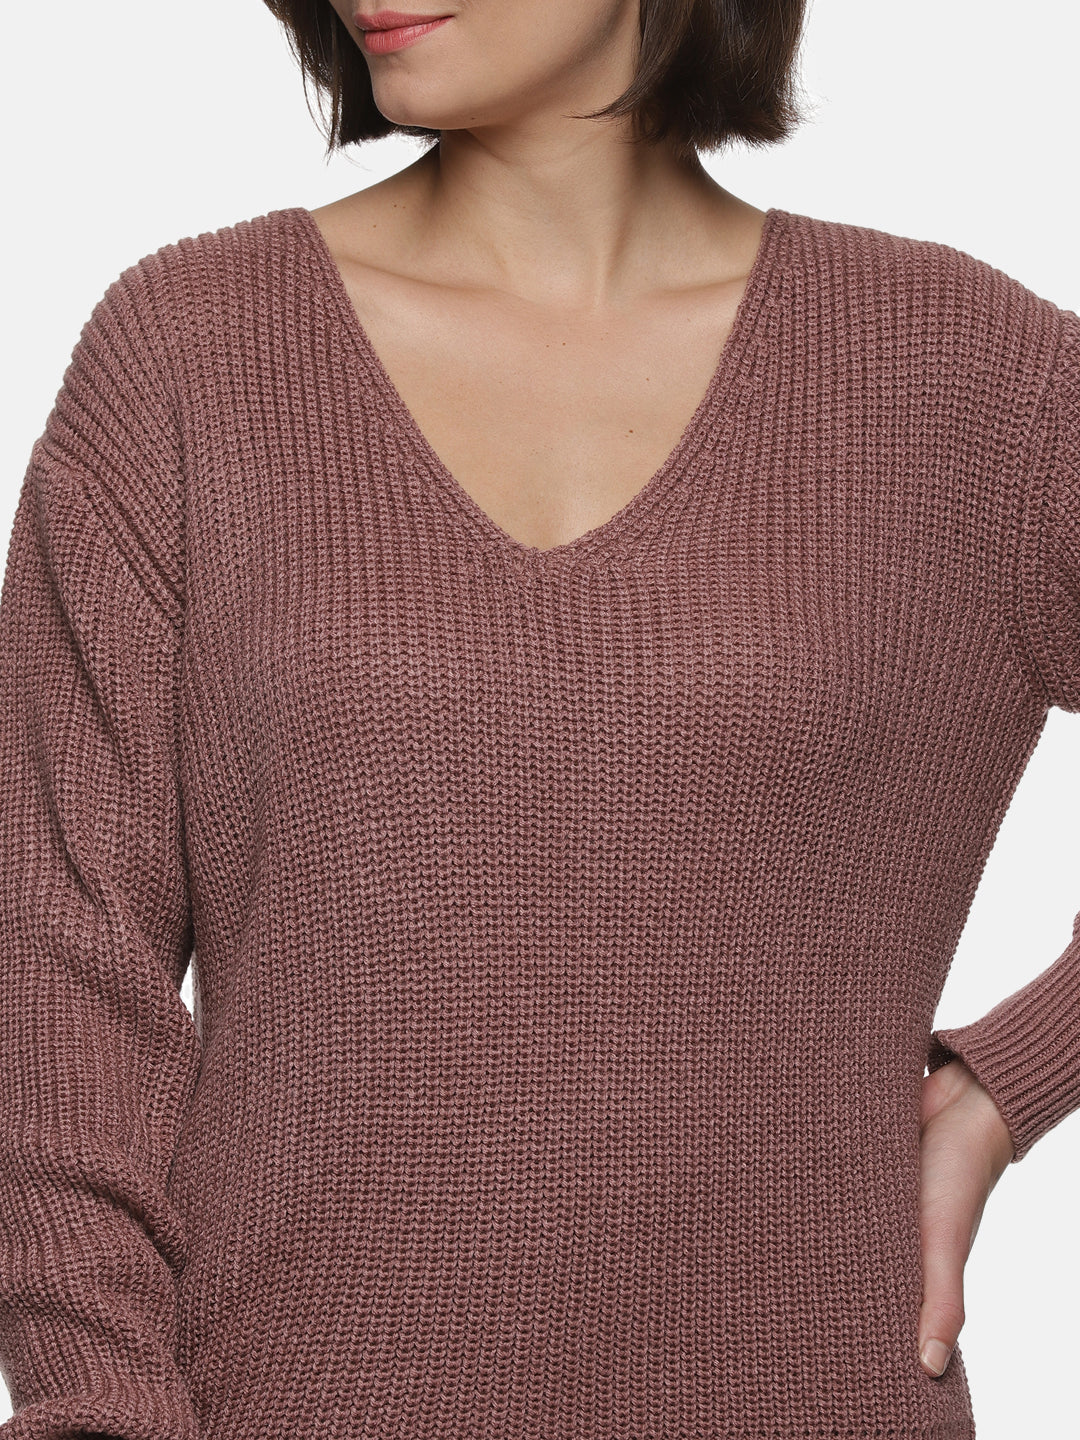 IS.U Light Brown Knitted V-neck Sweater